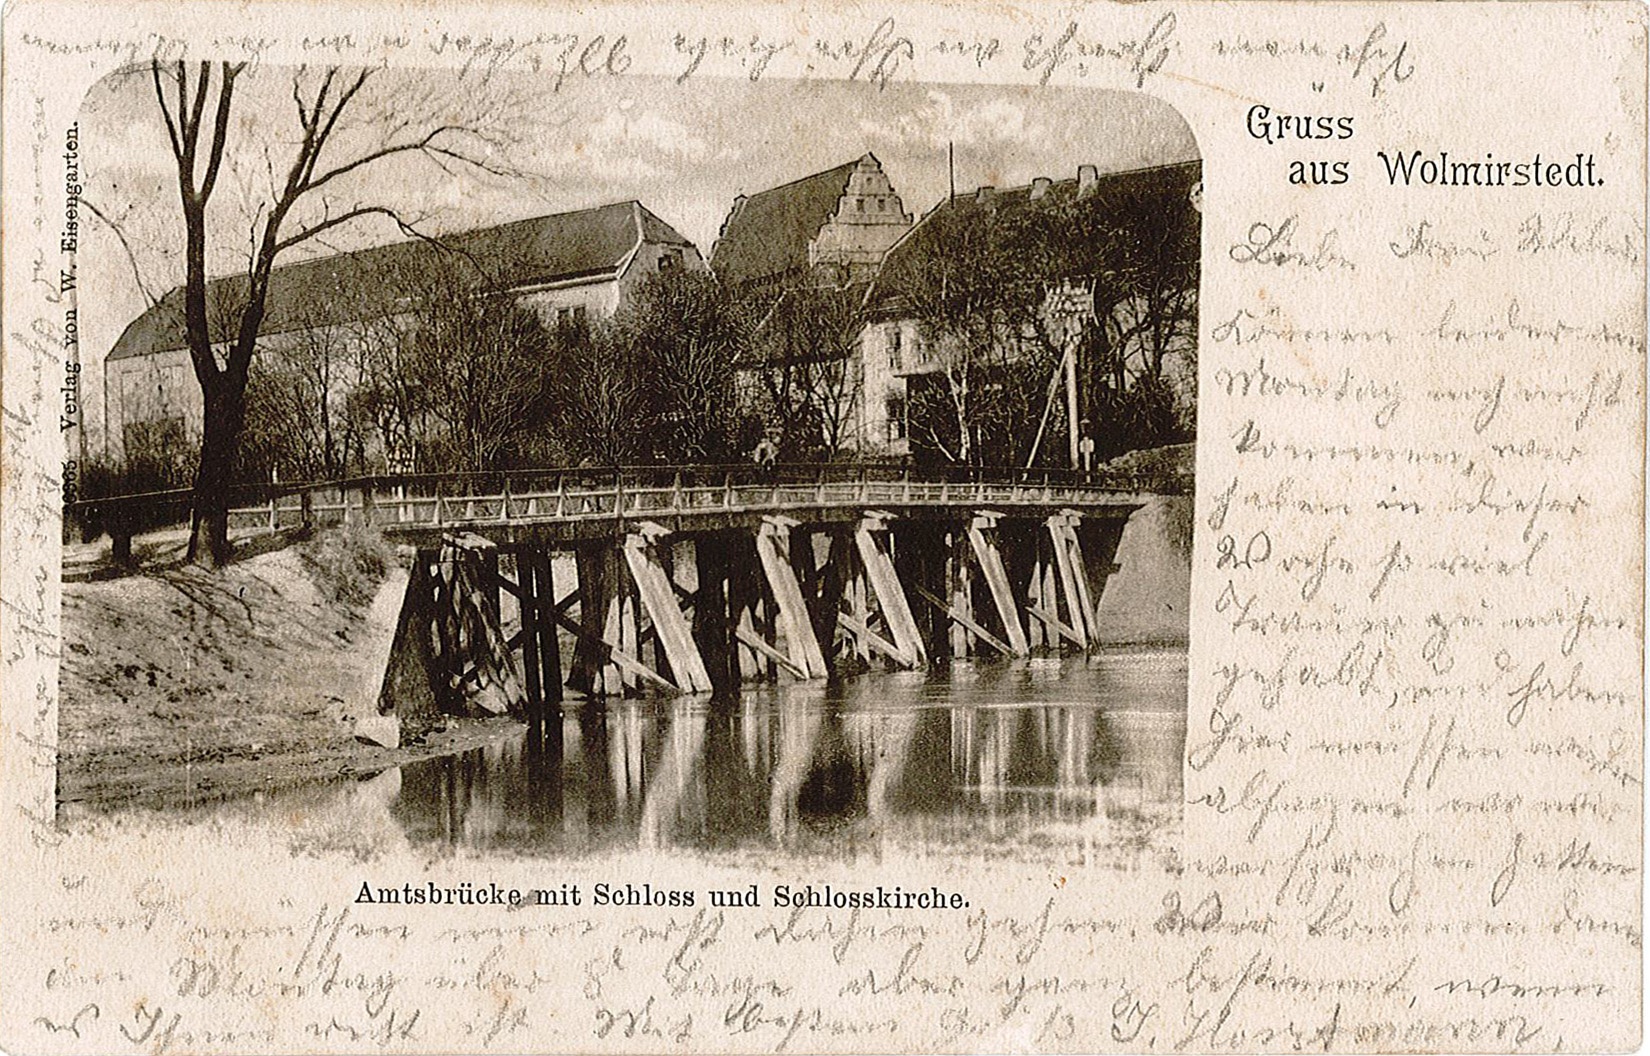 Postkarte (Museum Wolmirstedt RR-F)